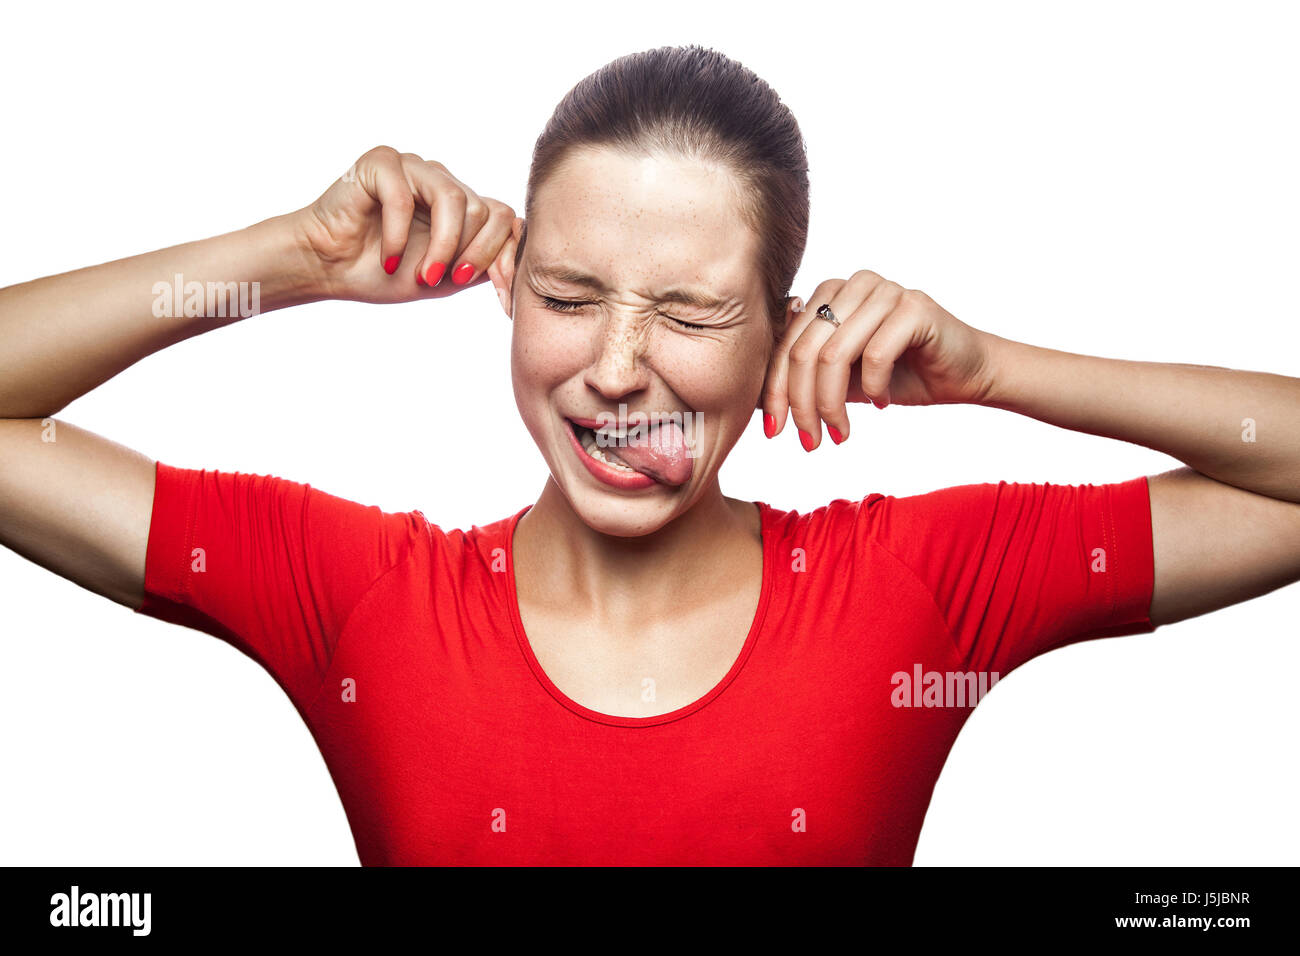 Portrait of crazy funny woman in red t-shirt with freckles. looking at camera, studio shot. isolated on white background. Stock Photo